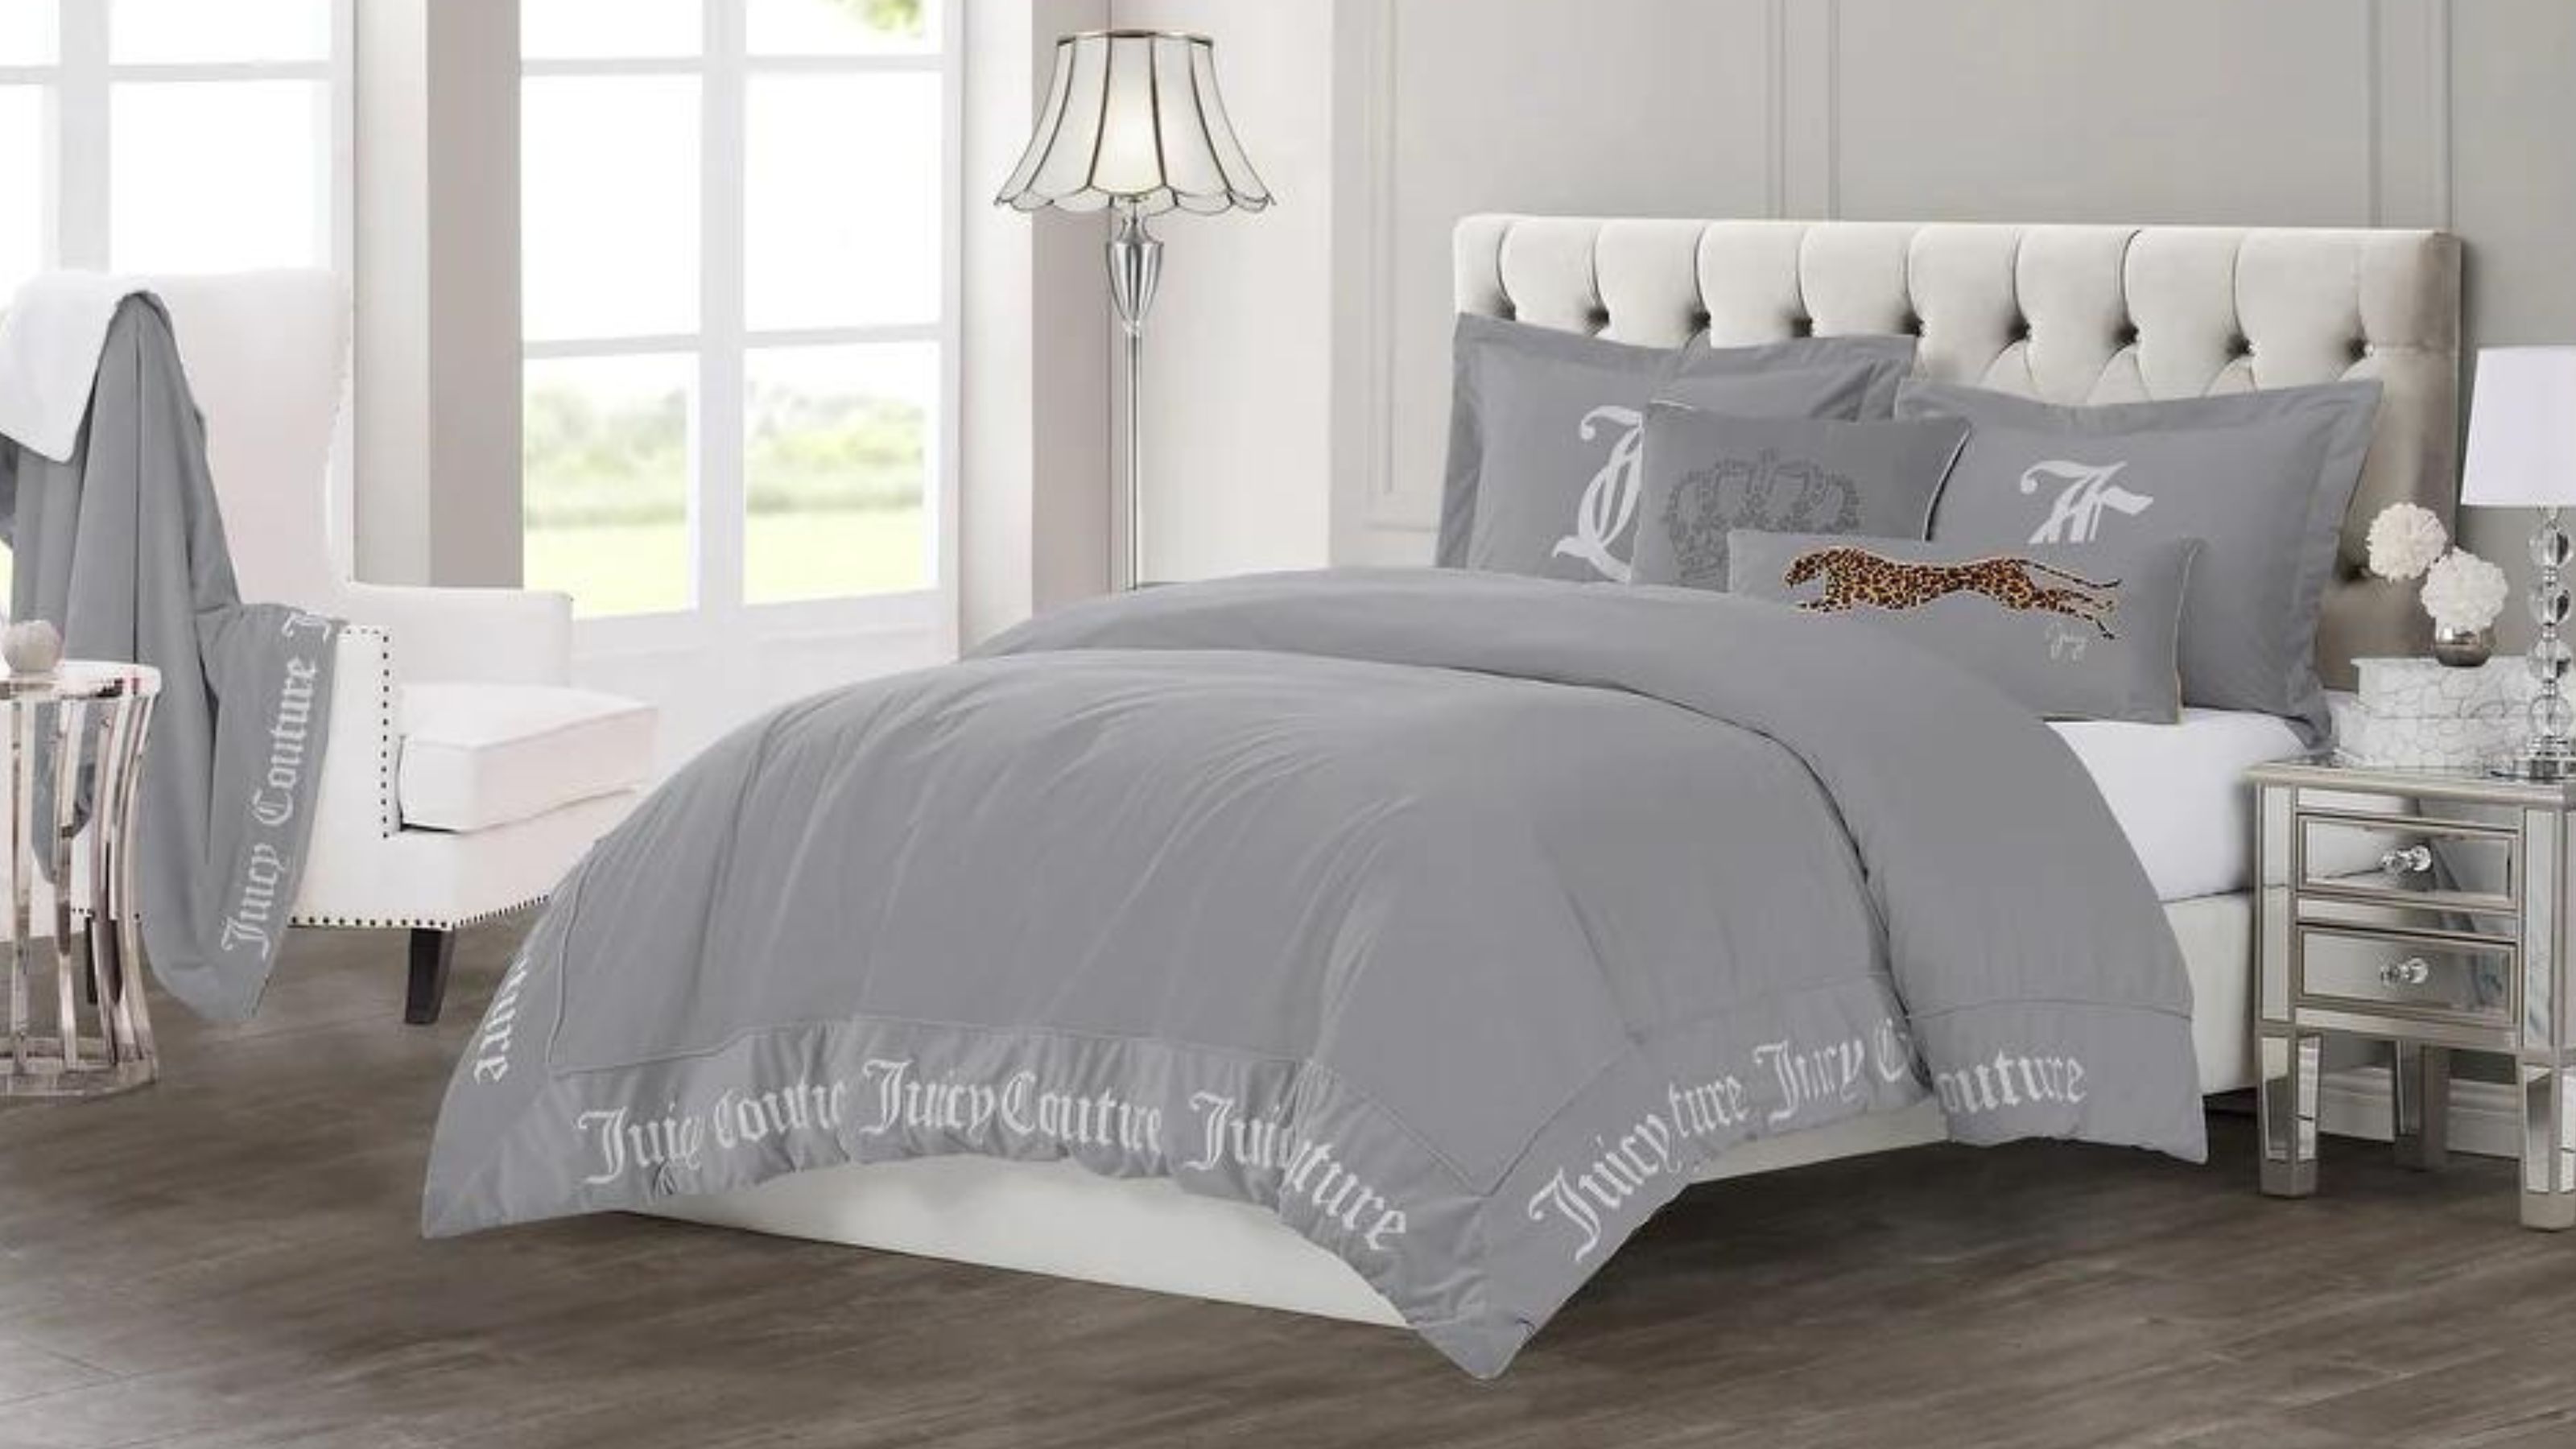 You can get Juicy Couture bedding on Amazon for any Y2K-style bedroom ...